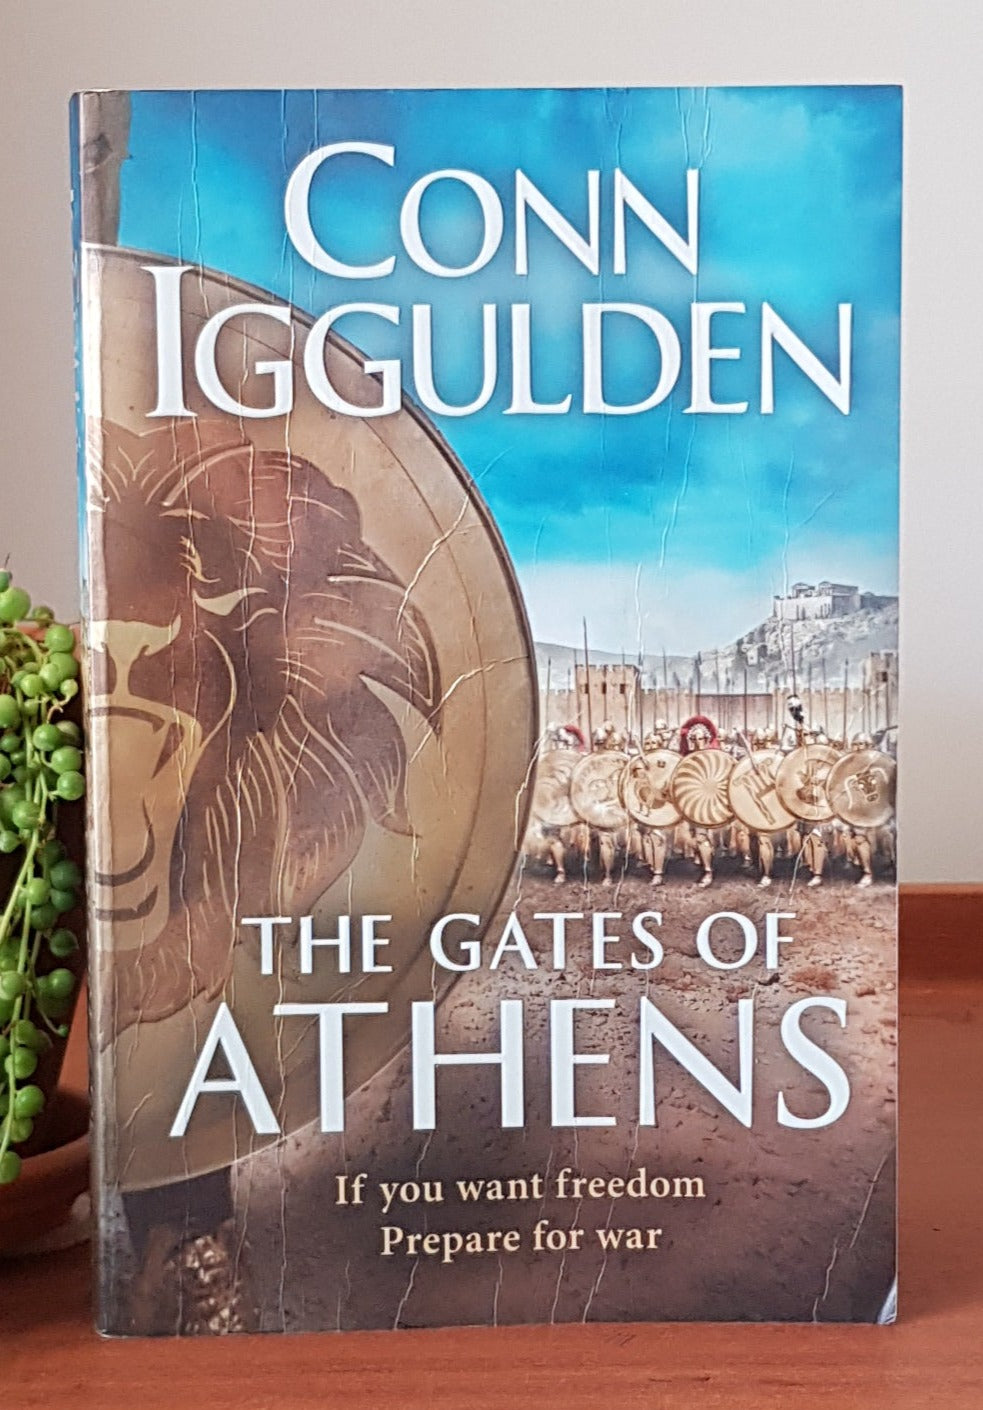 The Gates of Athens by Conn Iggulden